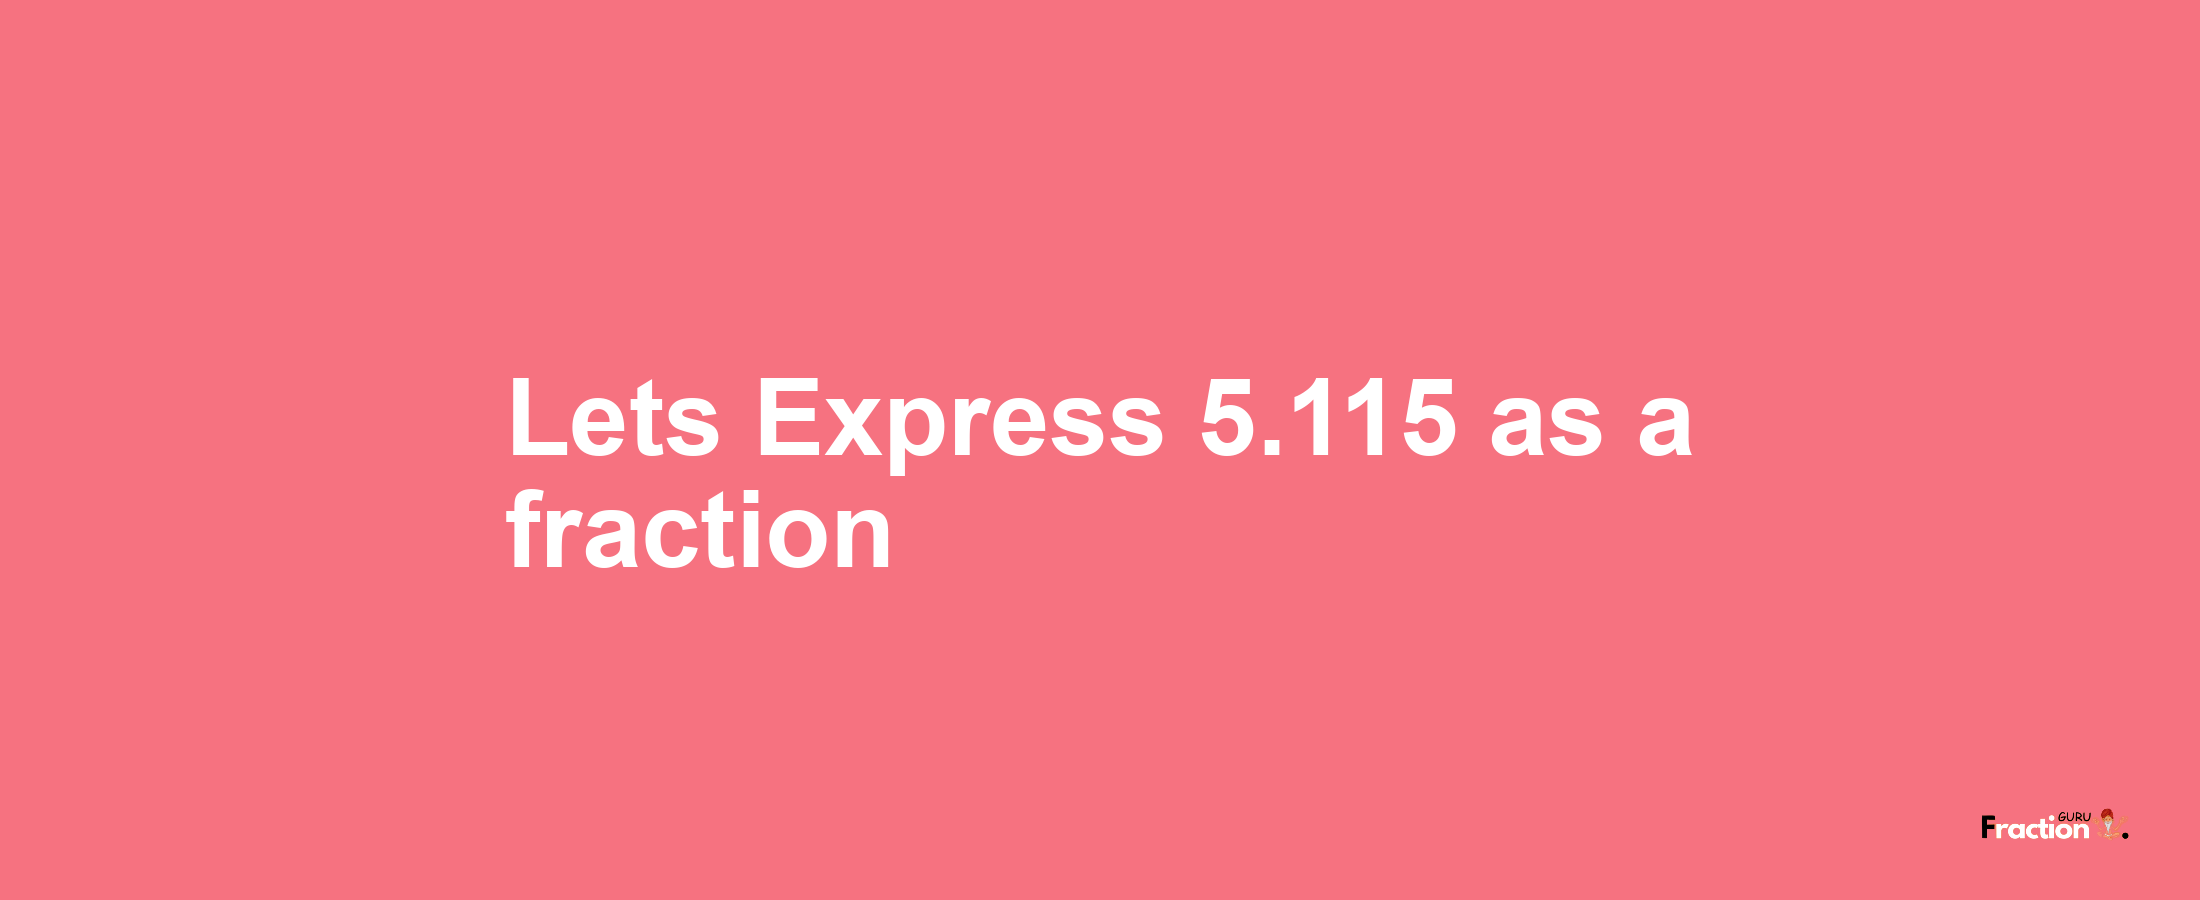 Lets Express 5.115 as afraction